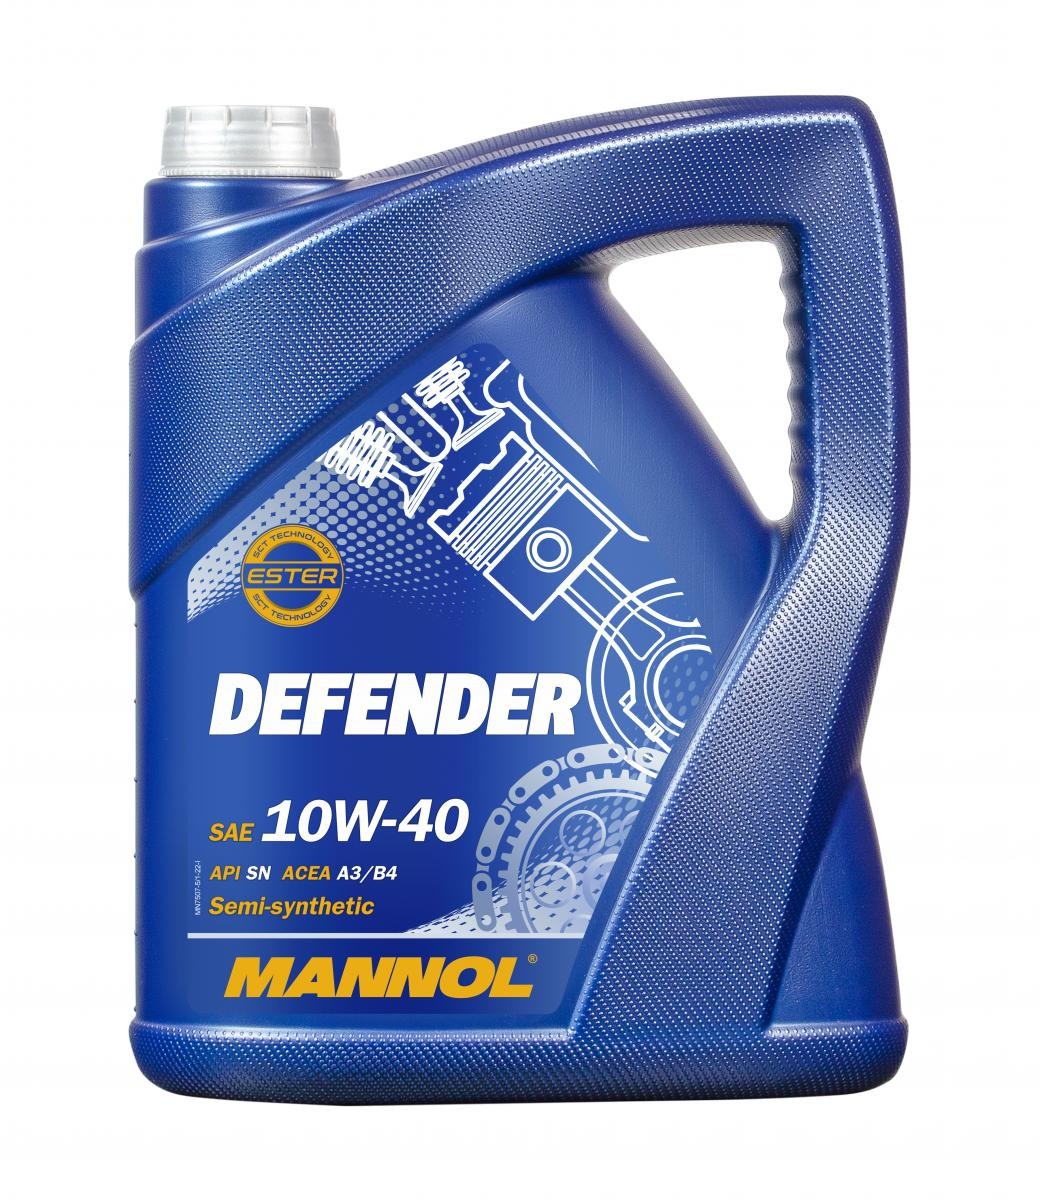 MANNOL MN7507-5 DEFENDER 10W-40, 5l, Part Synthetic Oil Engine oil MN7507-5 cheap